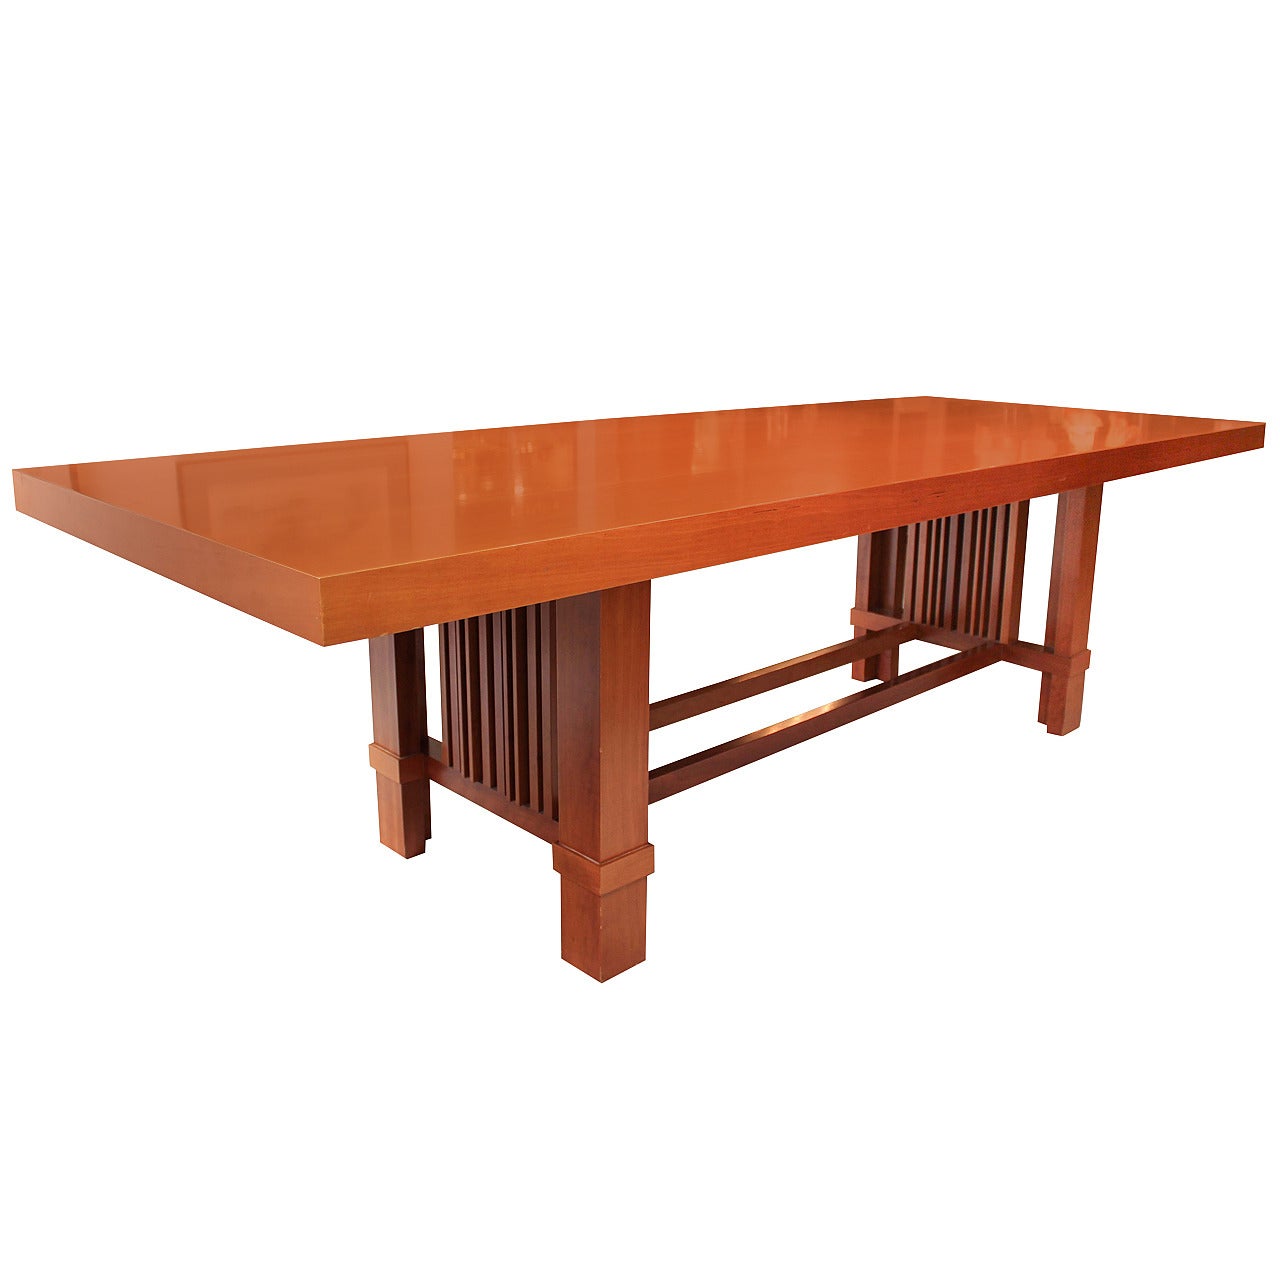 "Taliesin 2" Dining Table by Frank Lloyd Wright for Cassina